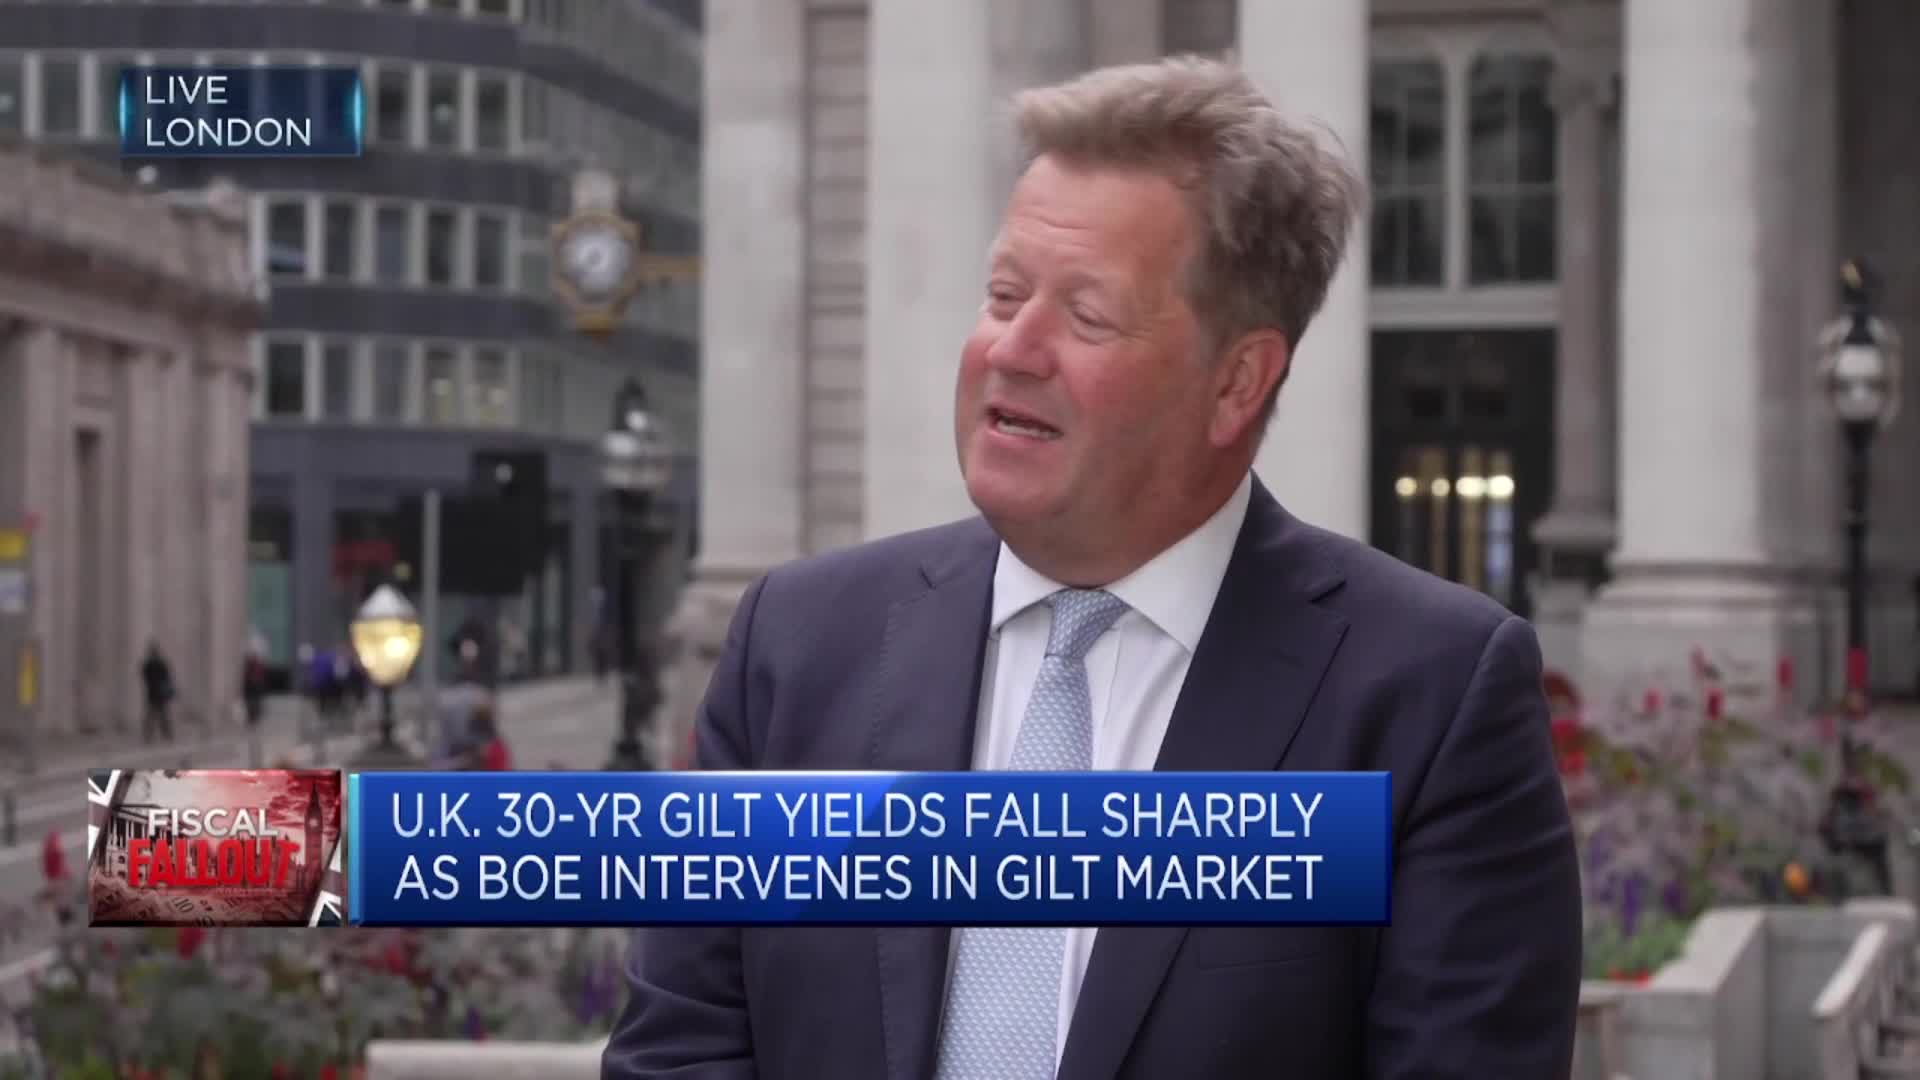 UK stocks are less attractive given high bond yields, says analyst